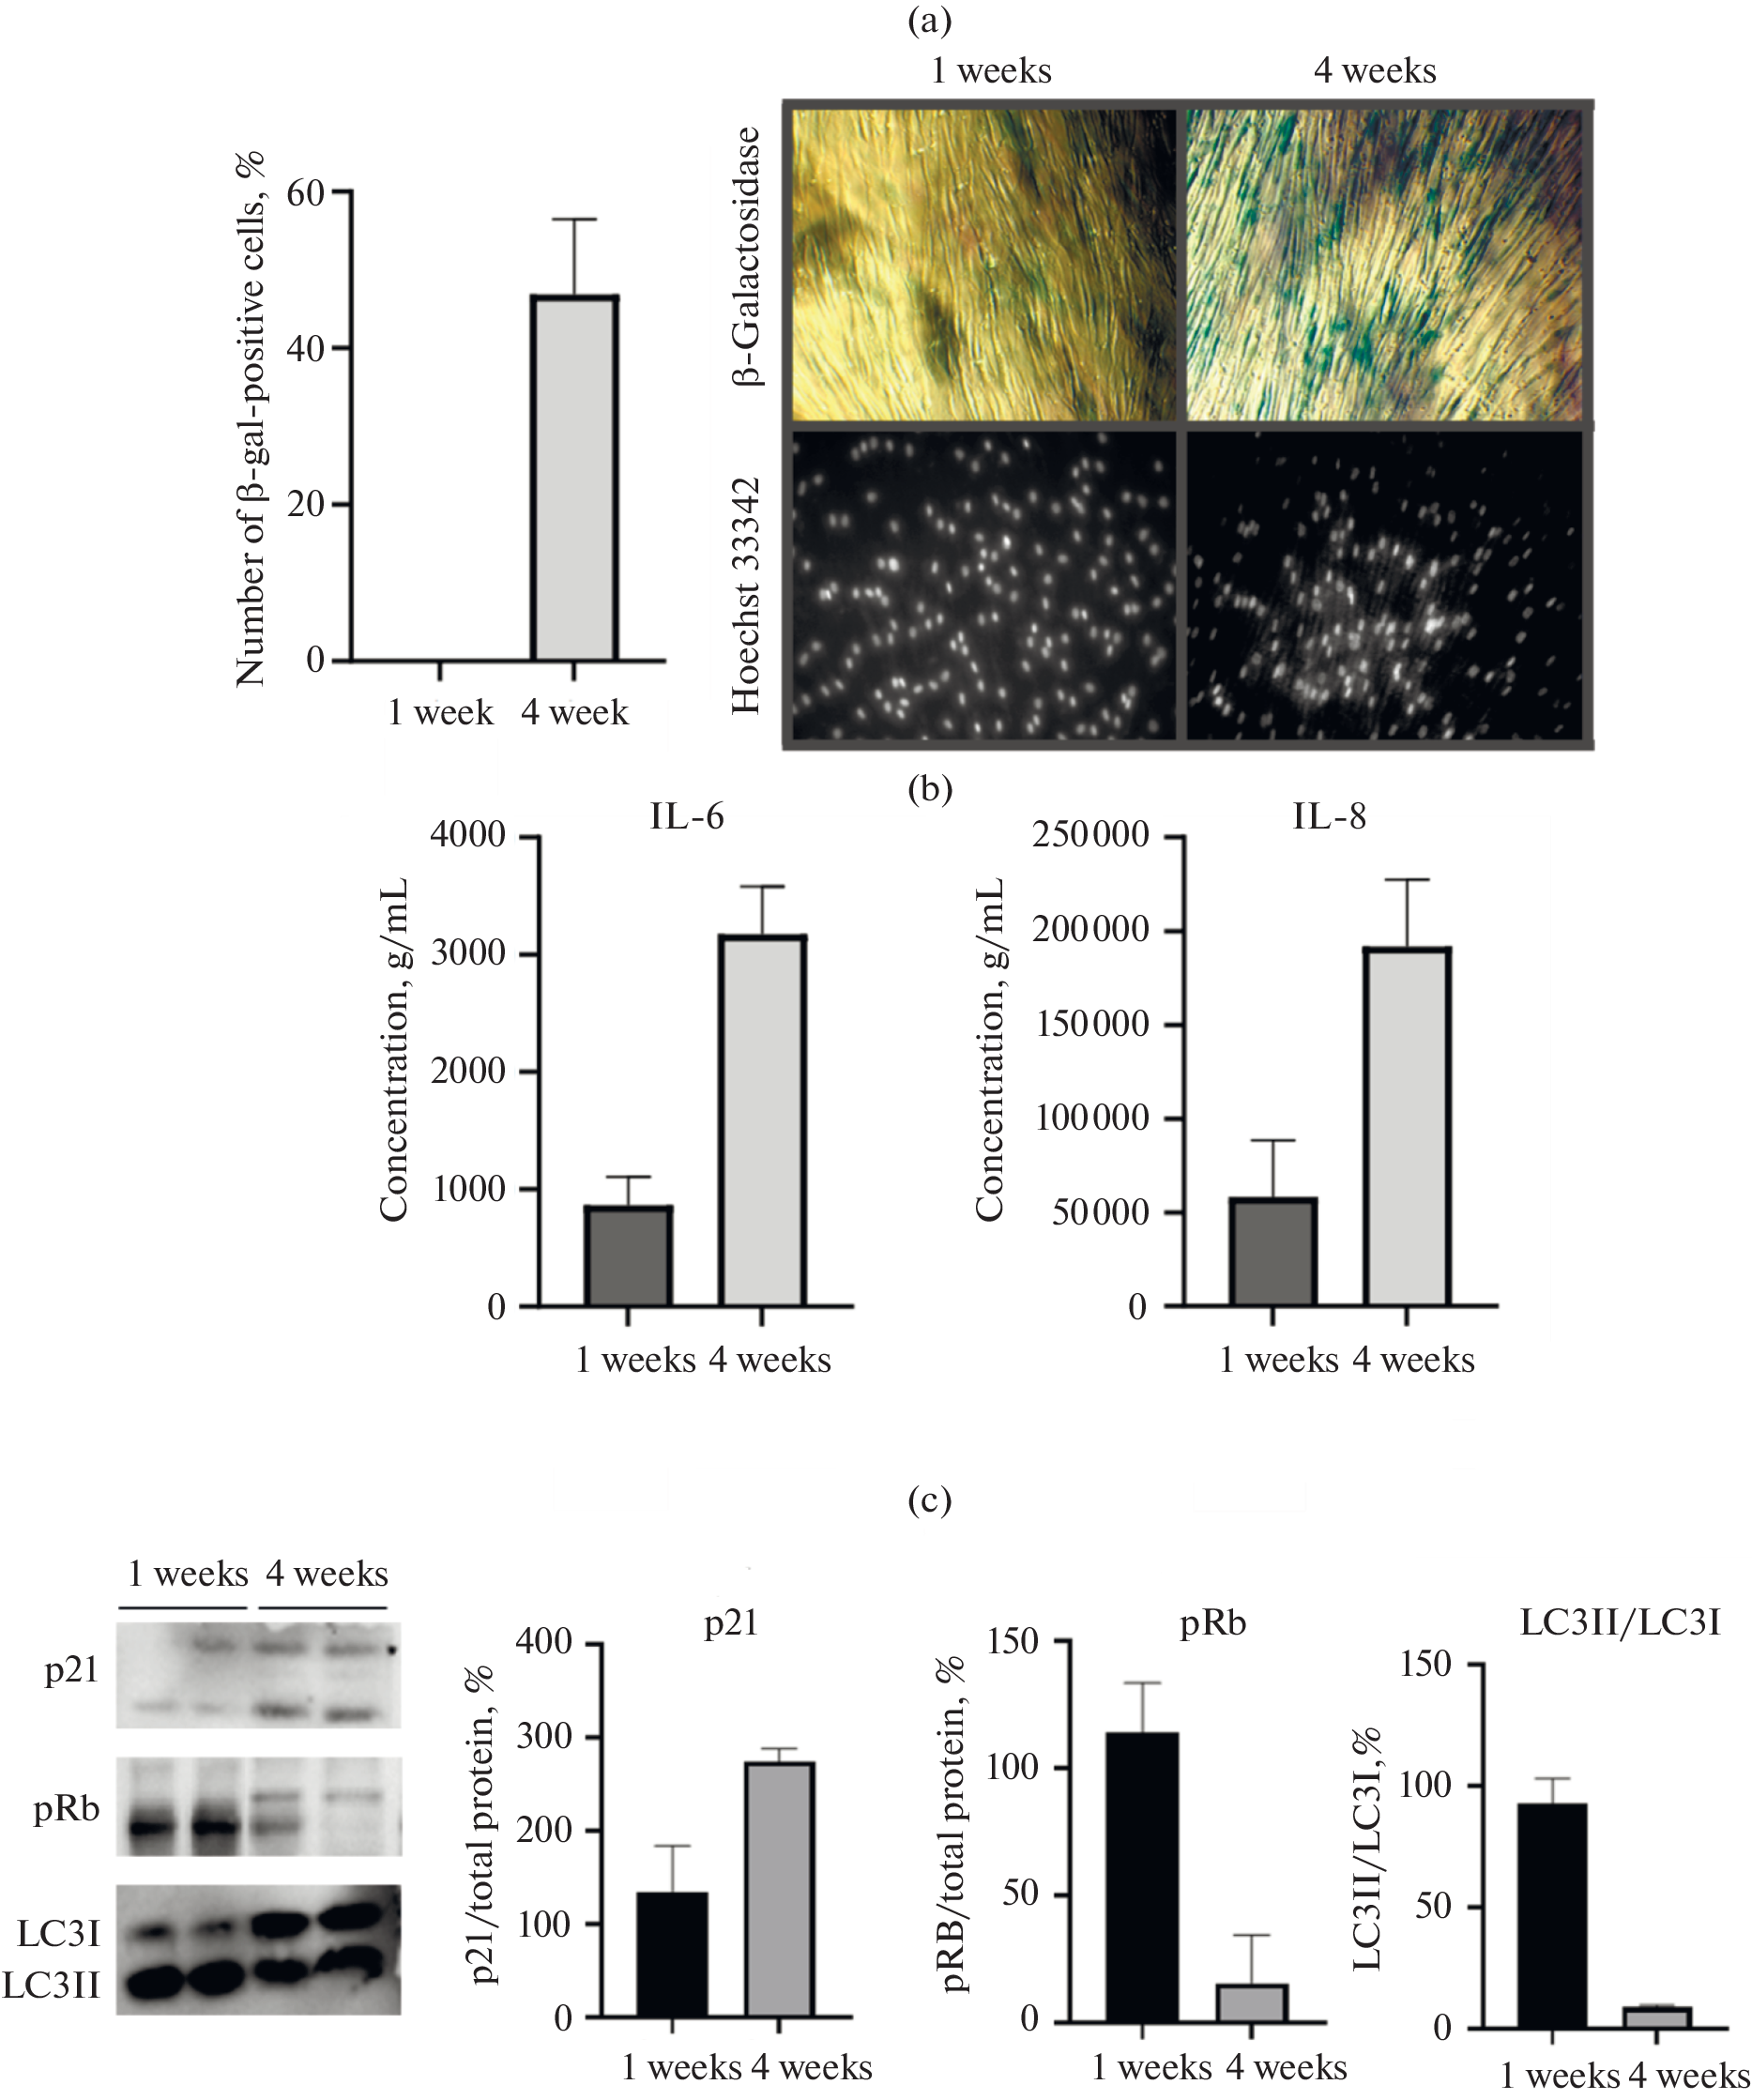 Geroprotective Effect of the Mitochondrial-Targeted Antioxidant SkQBerb in a Model of the Chronological Aging of MB135 Human Myoblasts